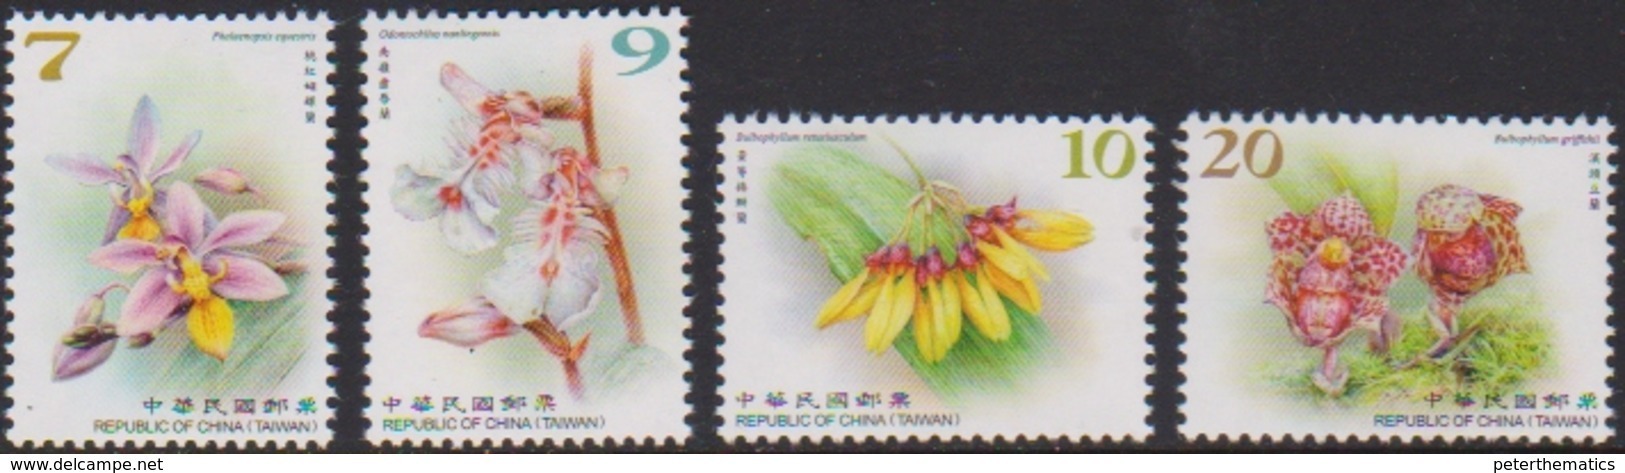 TAIWAN , 2018, MNH, FLORA, FLOWERS, ORCHIDS,4v - Orchids